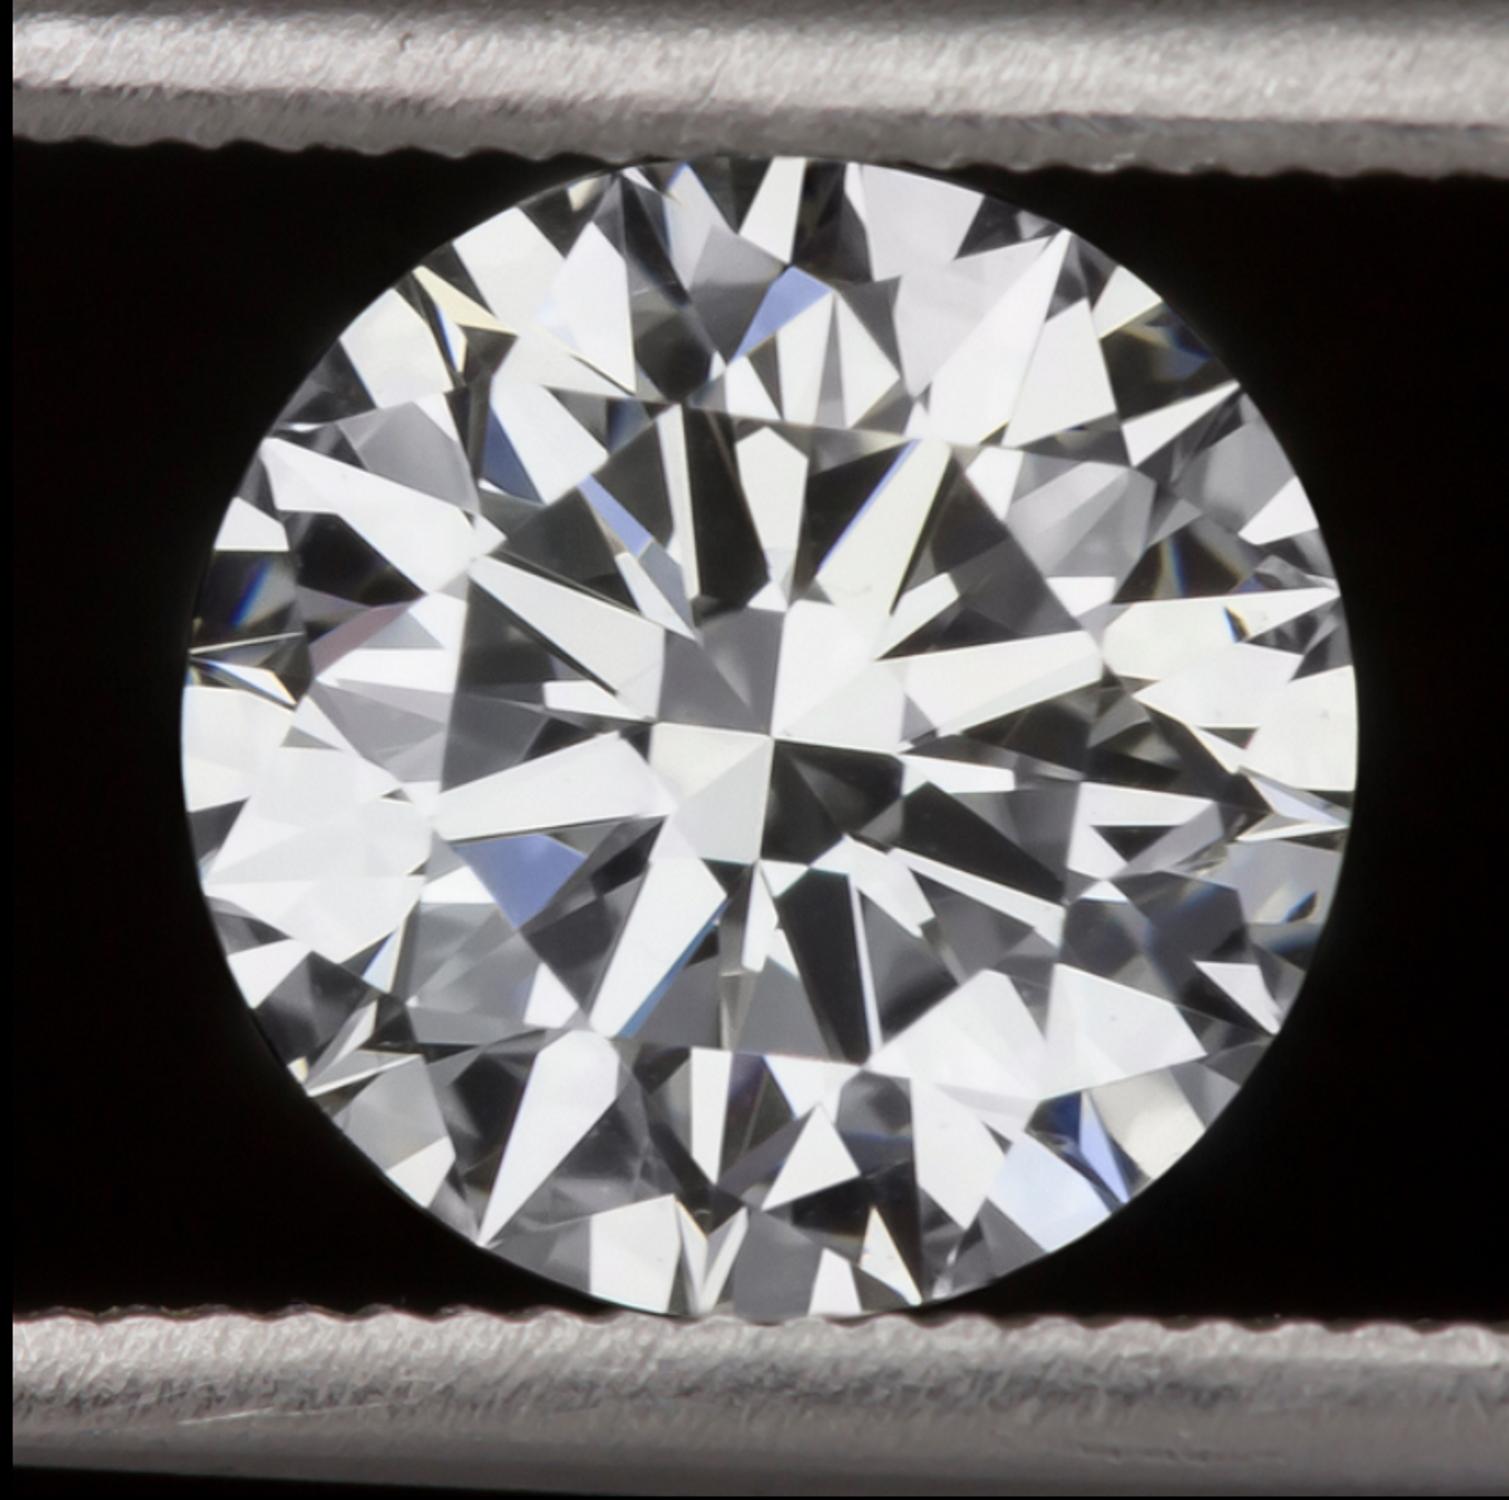 1.80 carat GIA certified Triple EX round brilliant cut diamond is beautifully white, completely eye clean, and impeccably finished! Cut with absolutely ideal proportions, it displays truly phenomenal sparkle! The diamond is certified by GIA, the